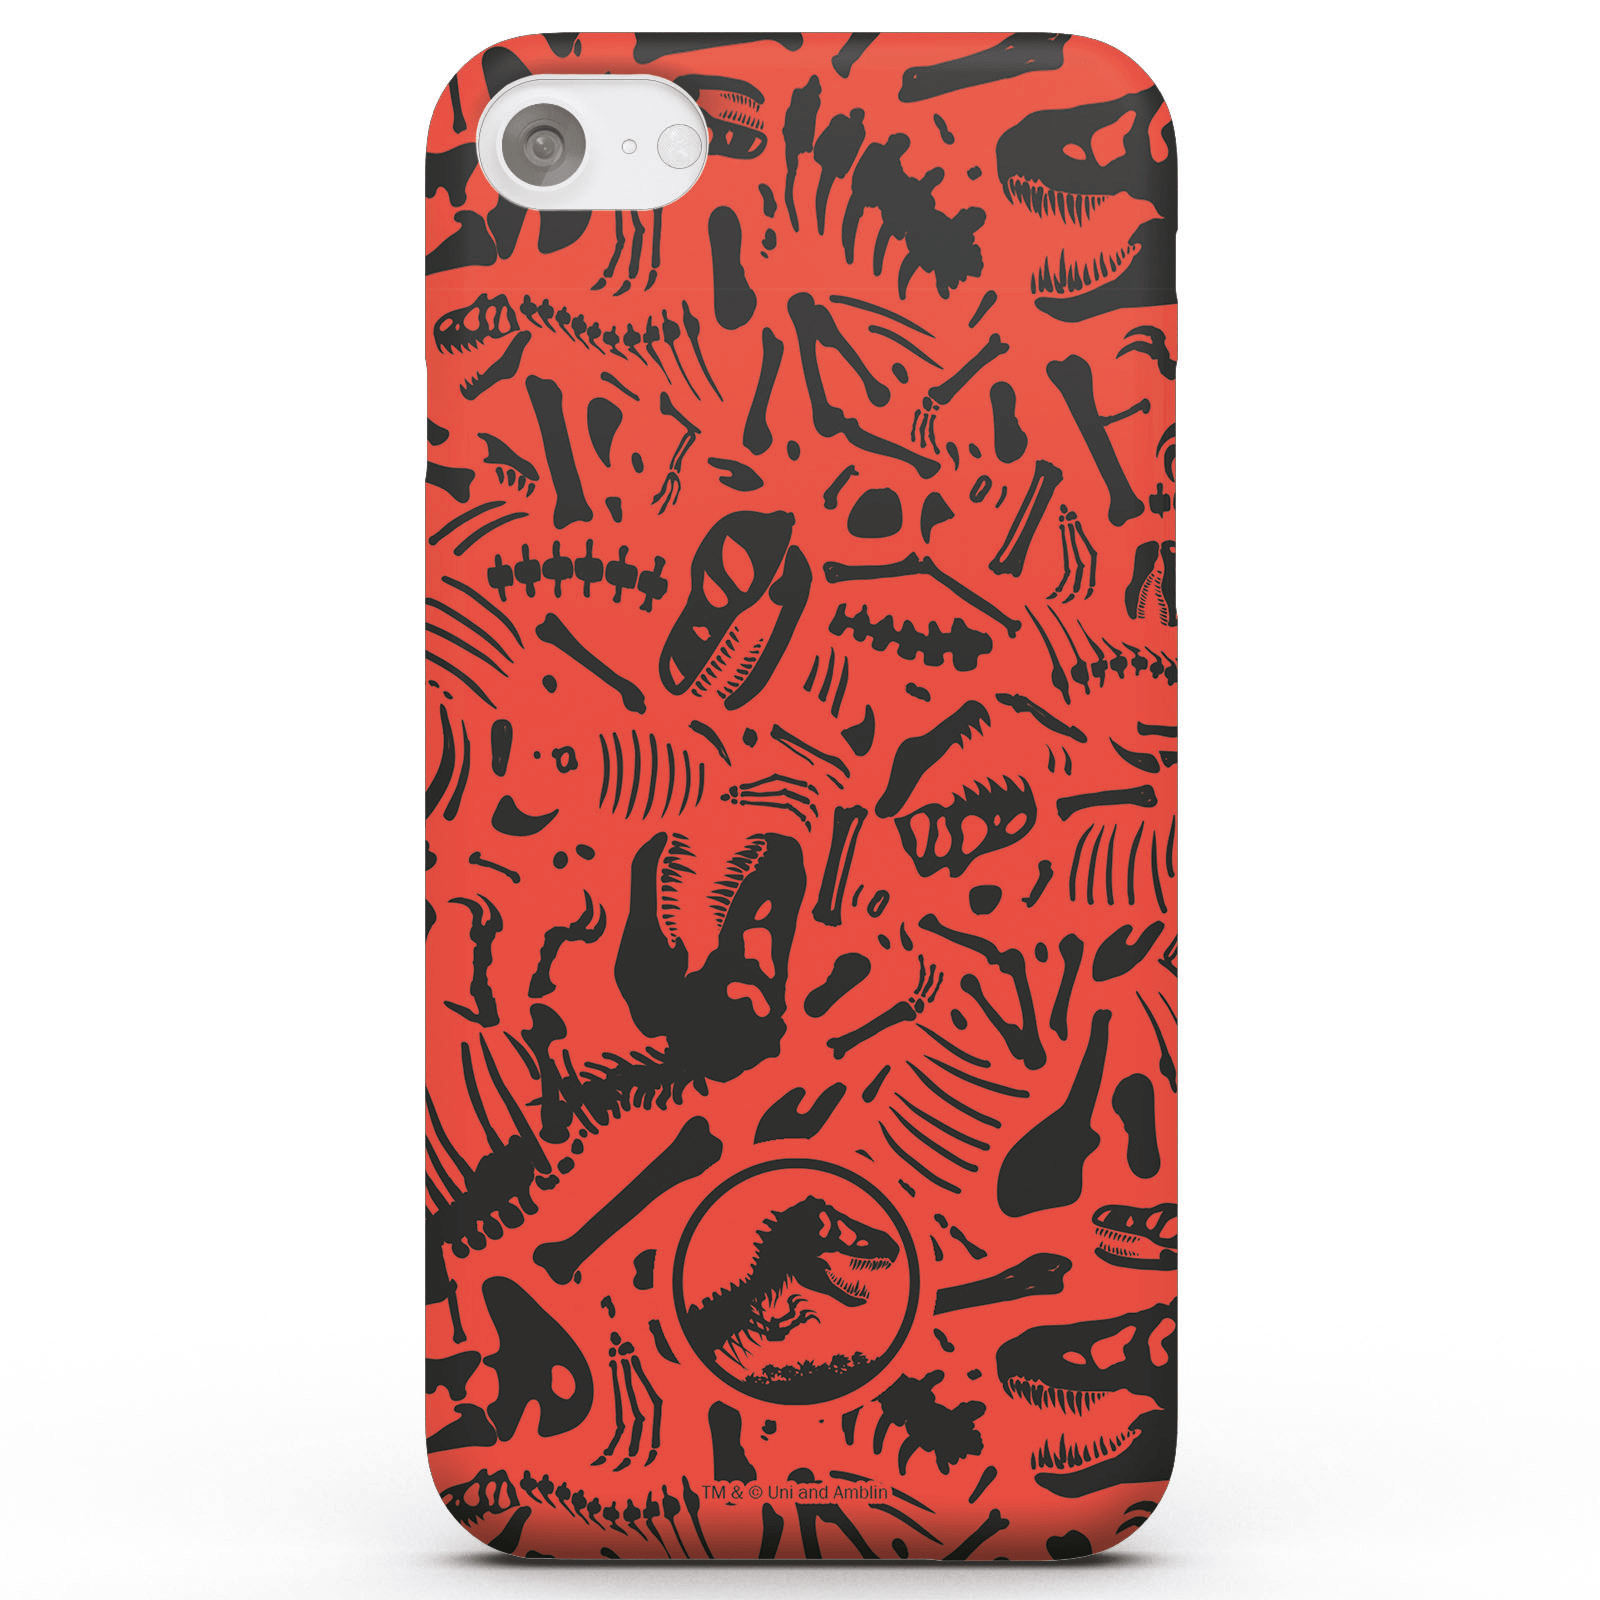 Jurassic Park Red Pattern Phone Case for iPhone and Android - iPhone 5/5s - Snap Case - Matte